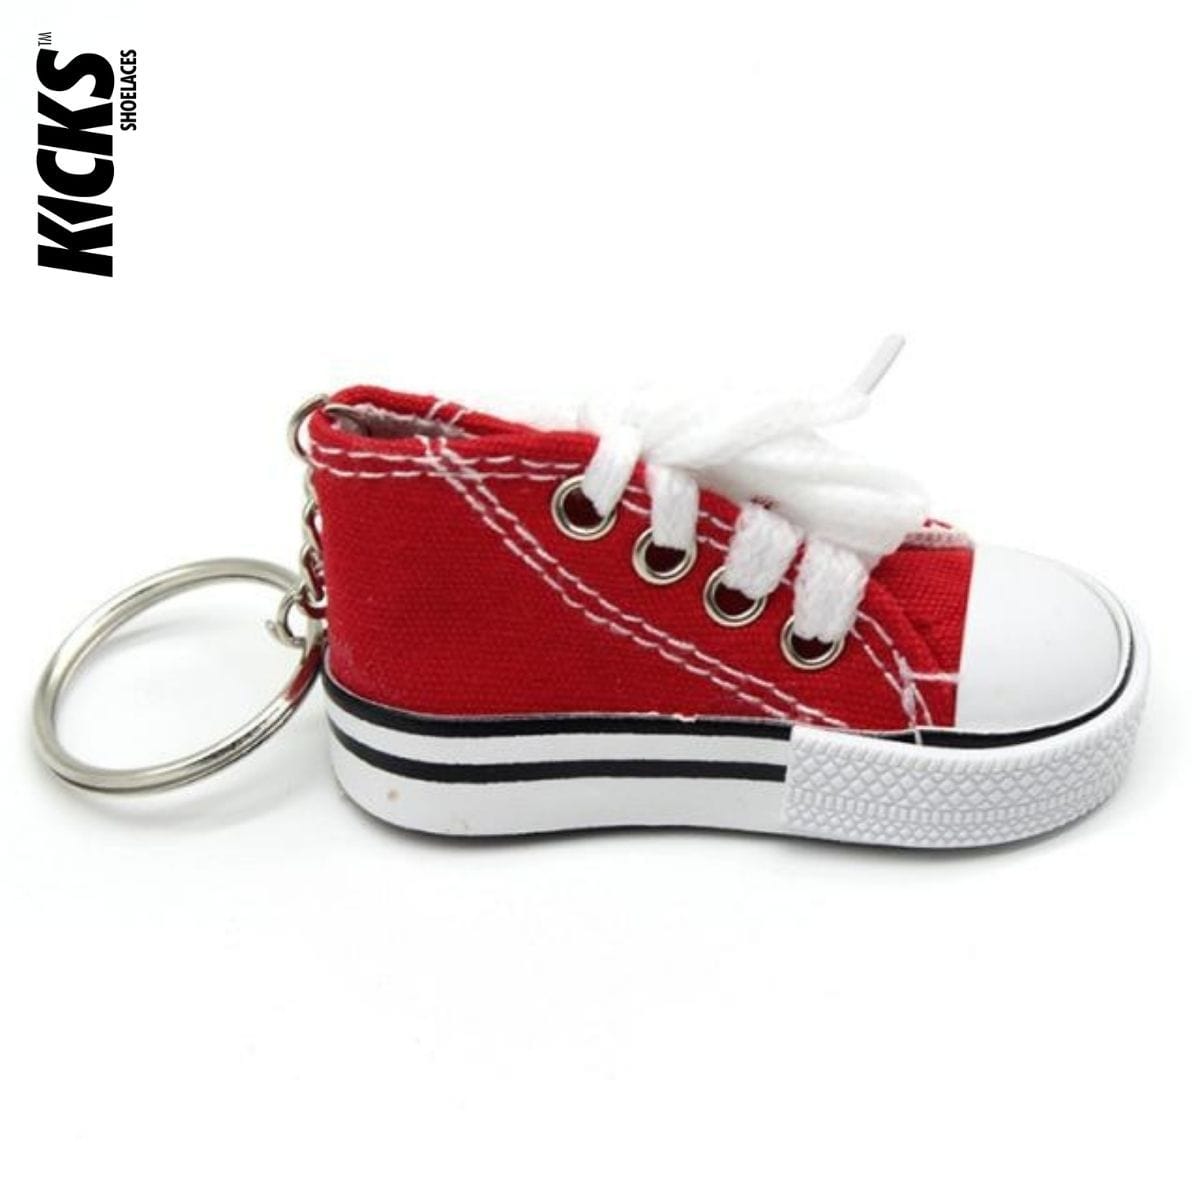 red-high-top-sneaker-keychain-perfect-gift-best-charm-accessories.jpg